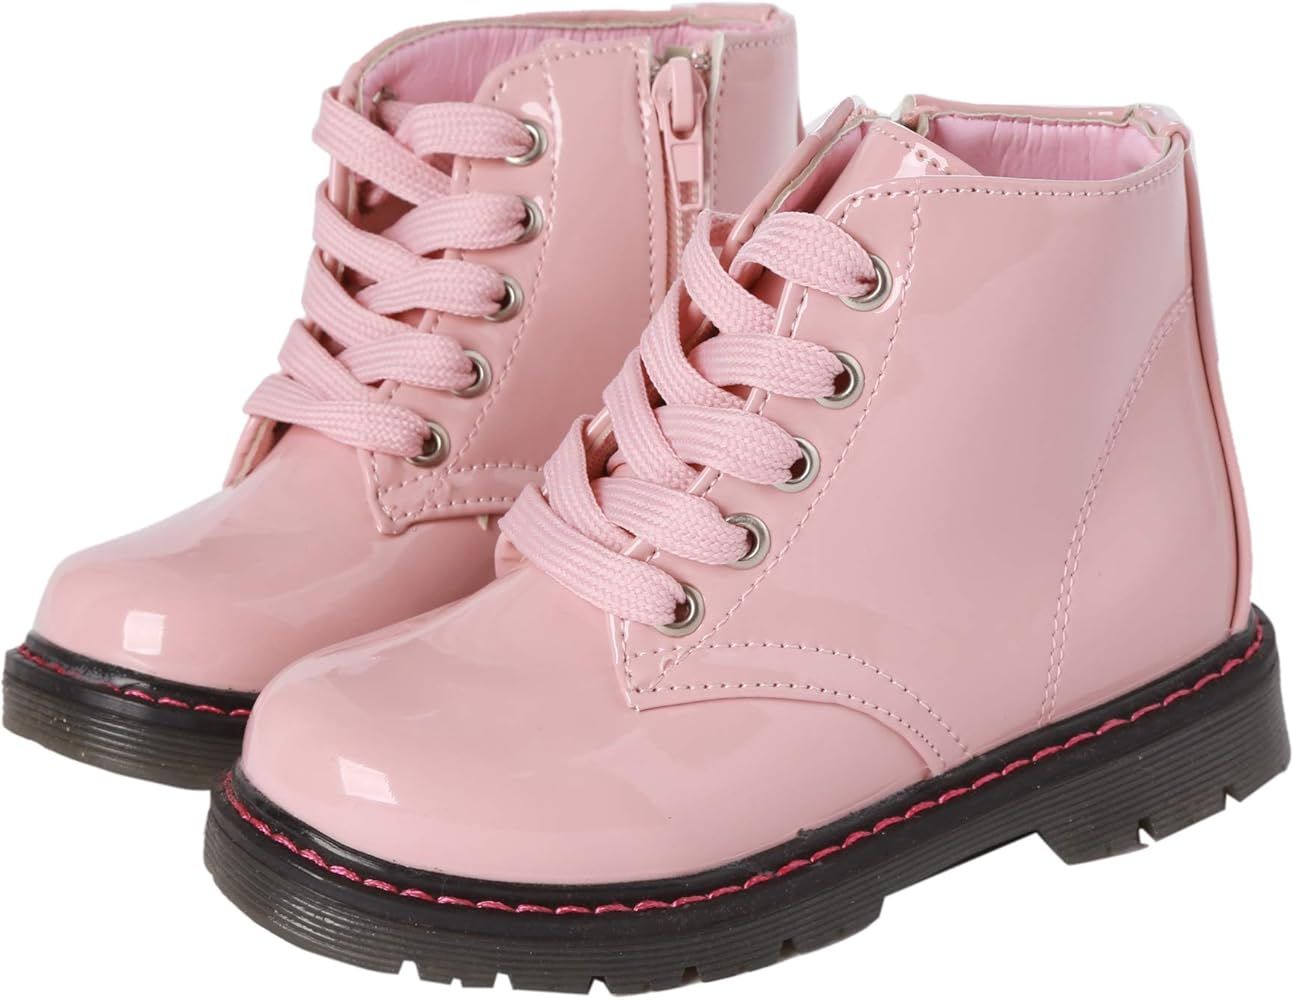 Toddler Girl Lace Up Zipper Waterproof Ankle Leather Boots | Amazon (US)